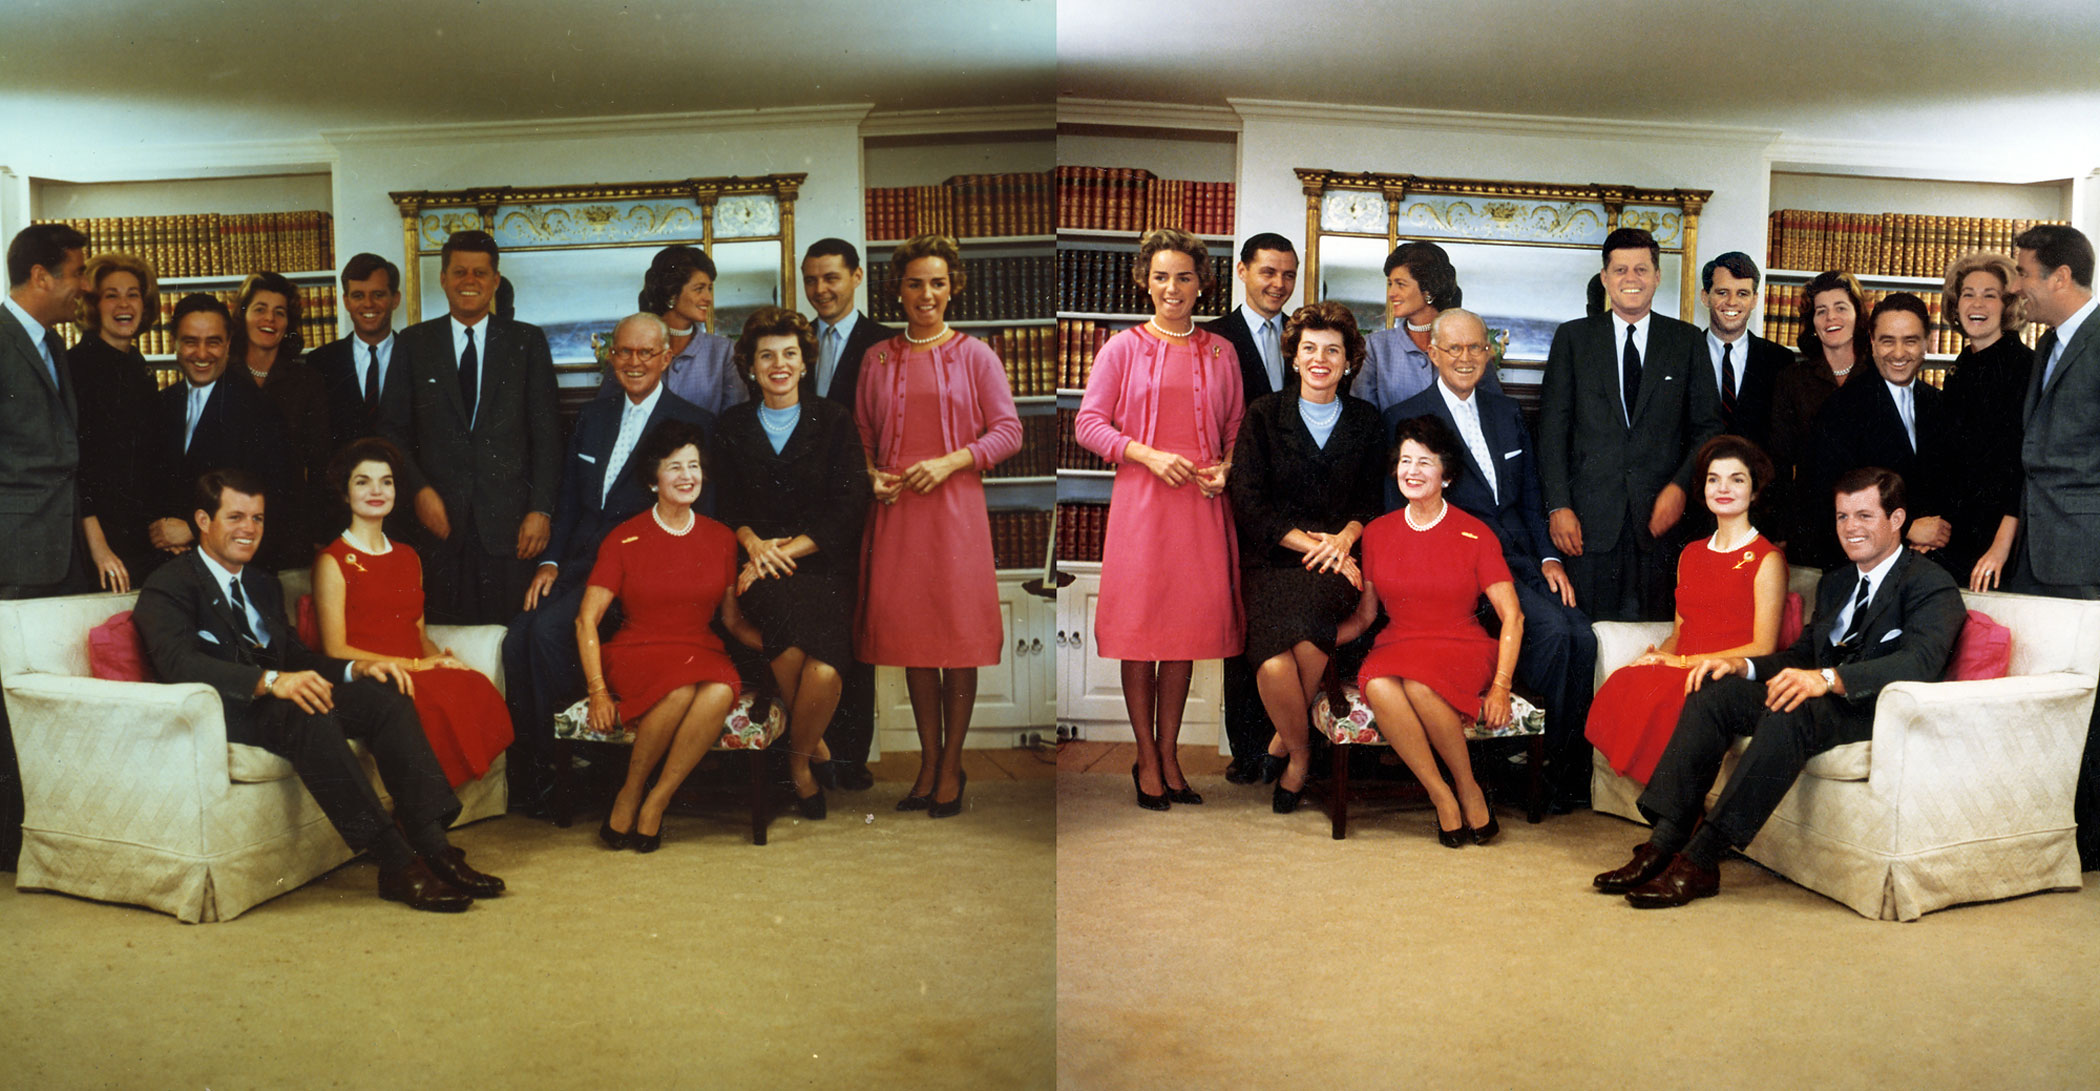 Jacques Lowe captured this family portrait of the Kennedys in Hyannis Port shortly after John F. Kennedy’s election results were announced. The image at left was accidentally flipped on the contact sheet. The exhibit photo, right, shows the image with the correct orientation and its color restored.